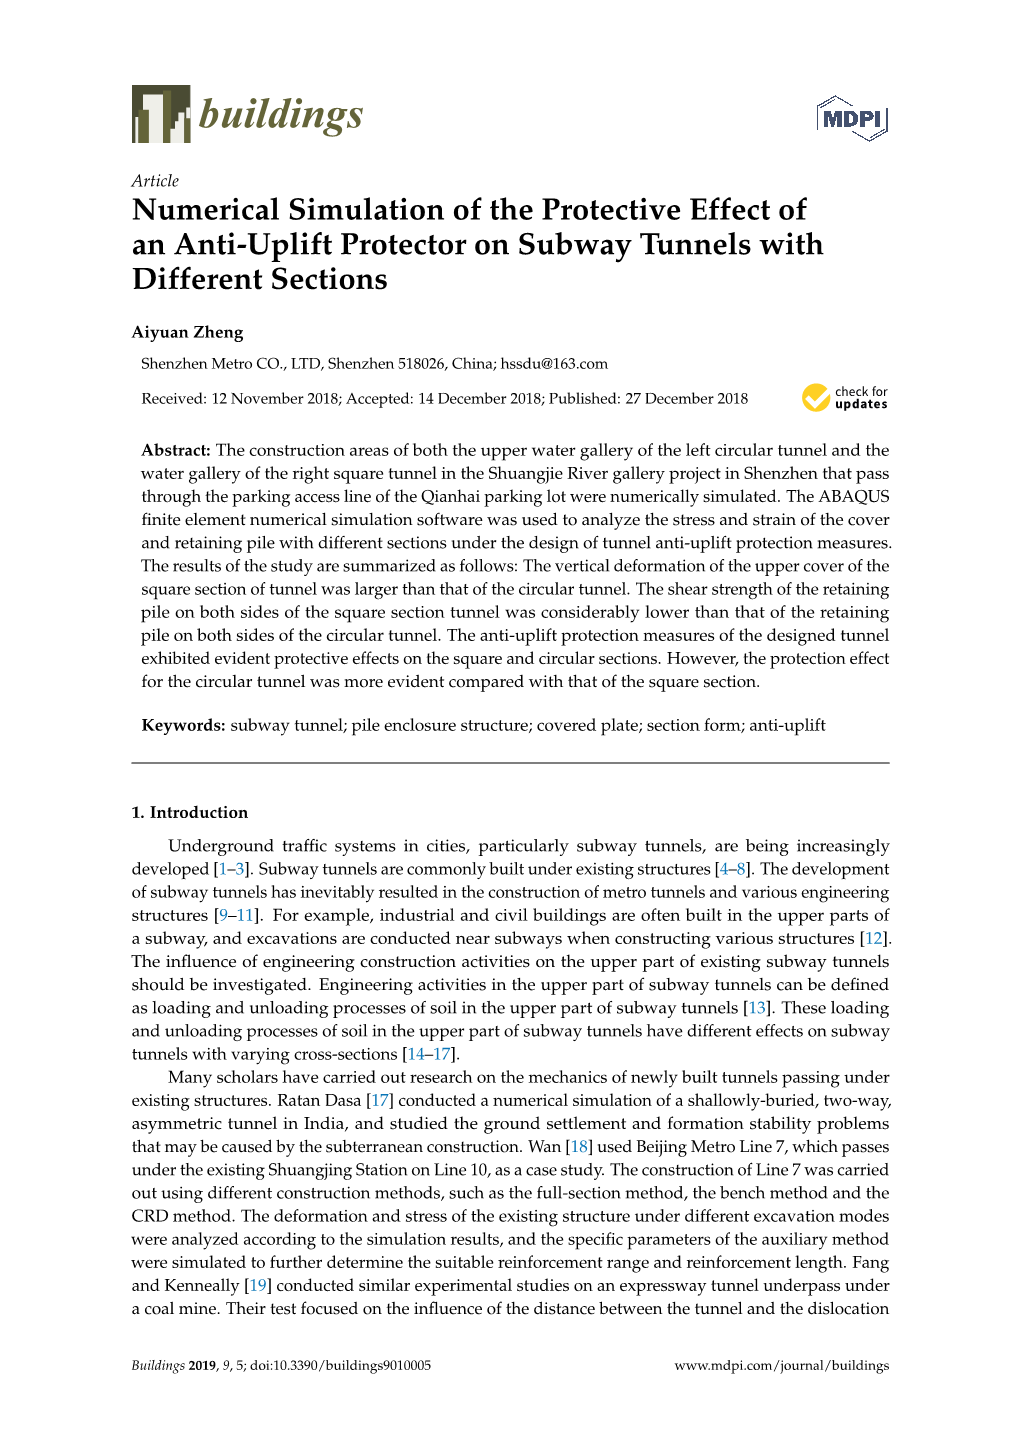 Numerical Simulation of the Protective Effect of an Anti-Uplift Protector on Subway Tunnels with Different Sections